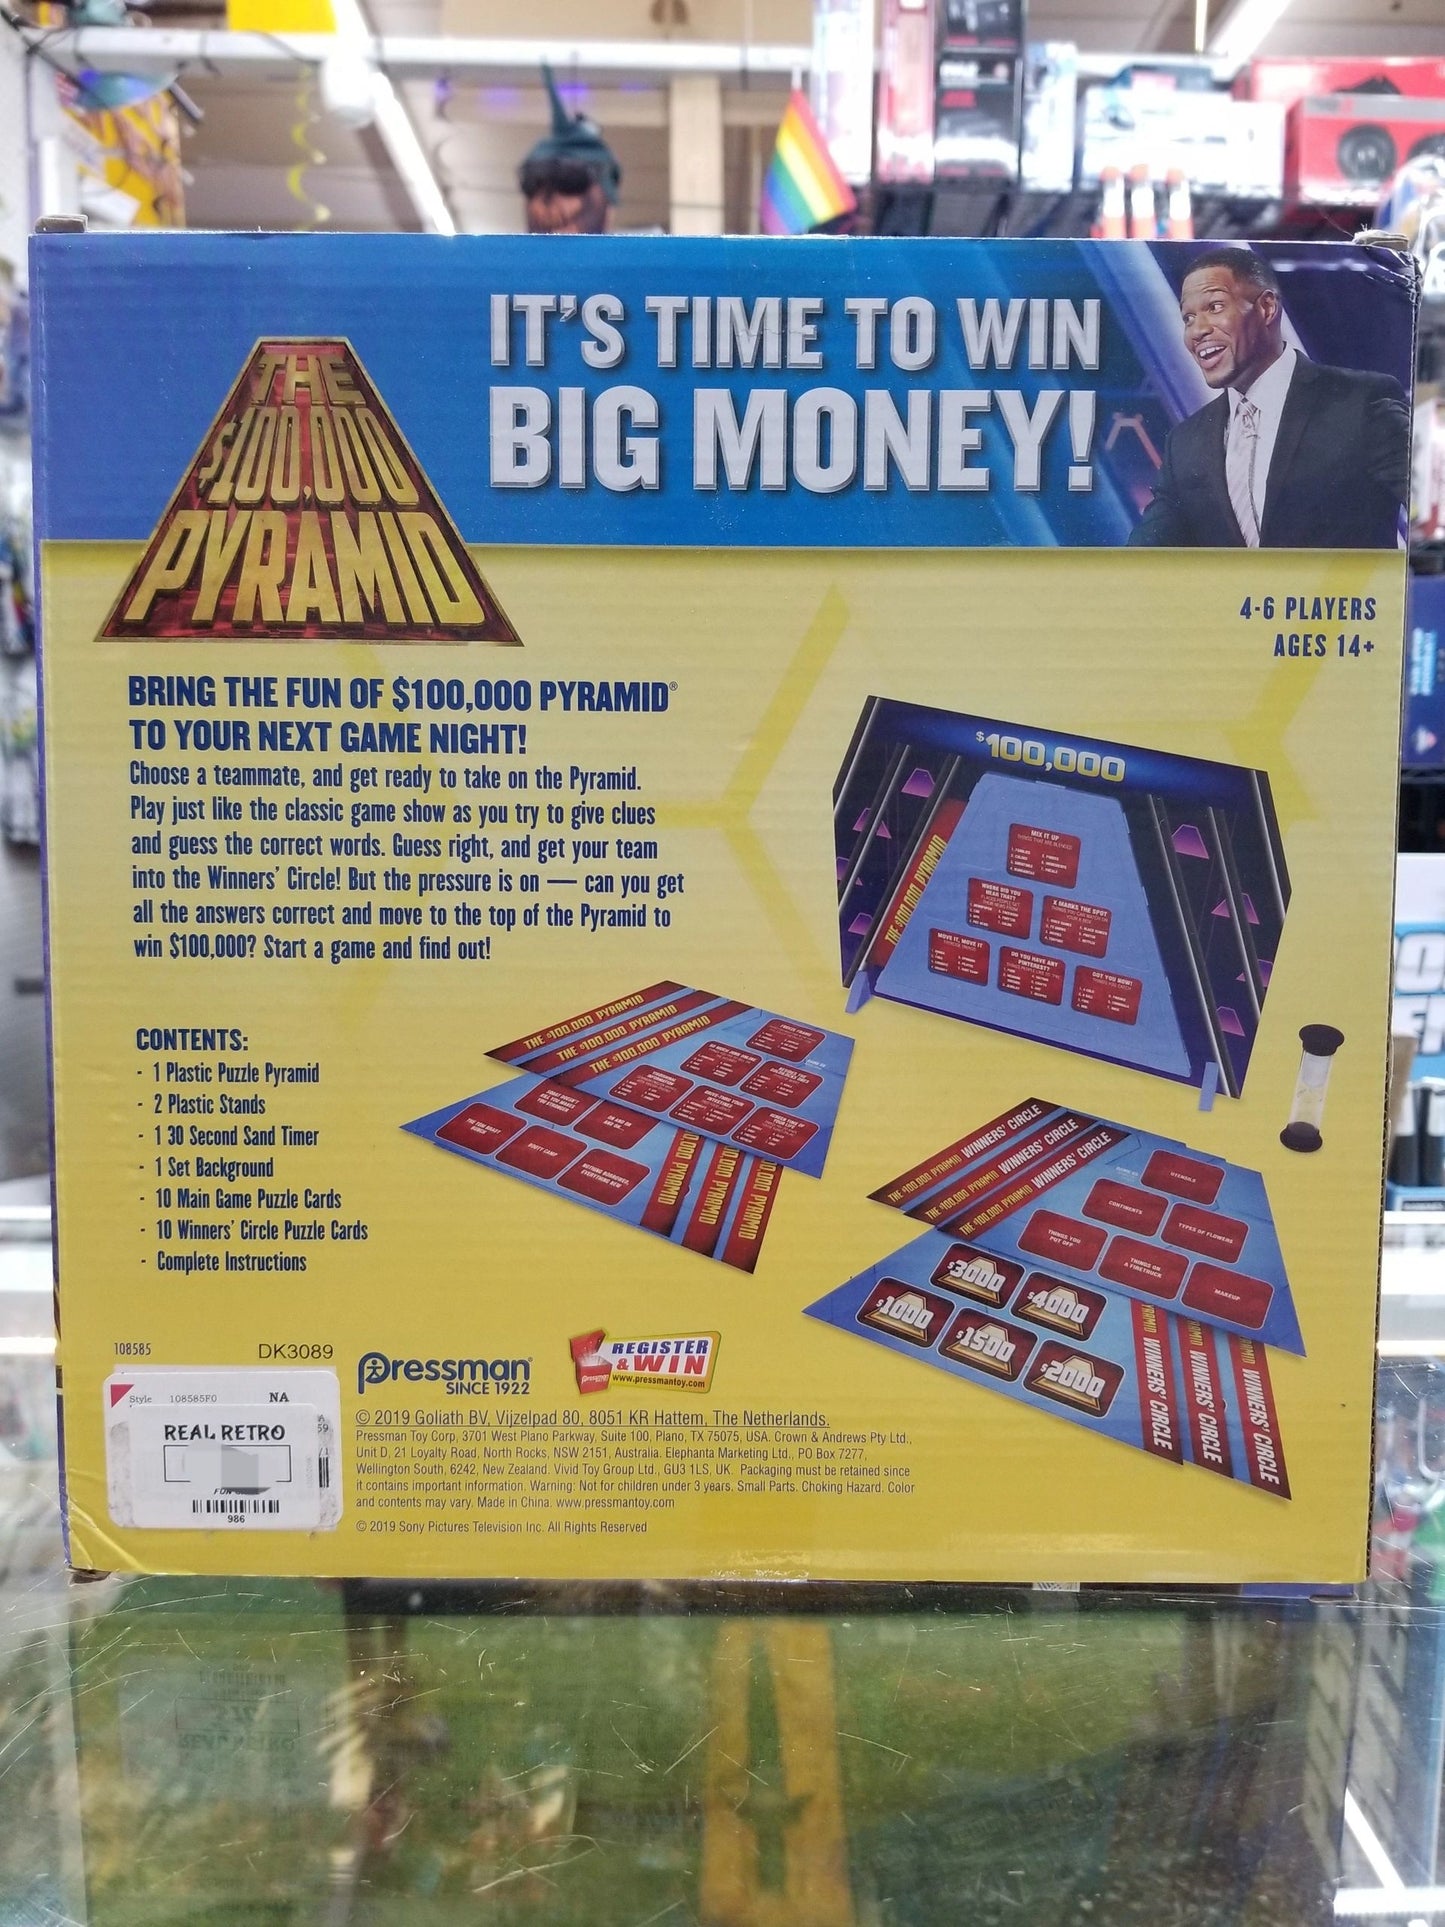 The $100,000 Pyramid Game